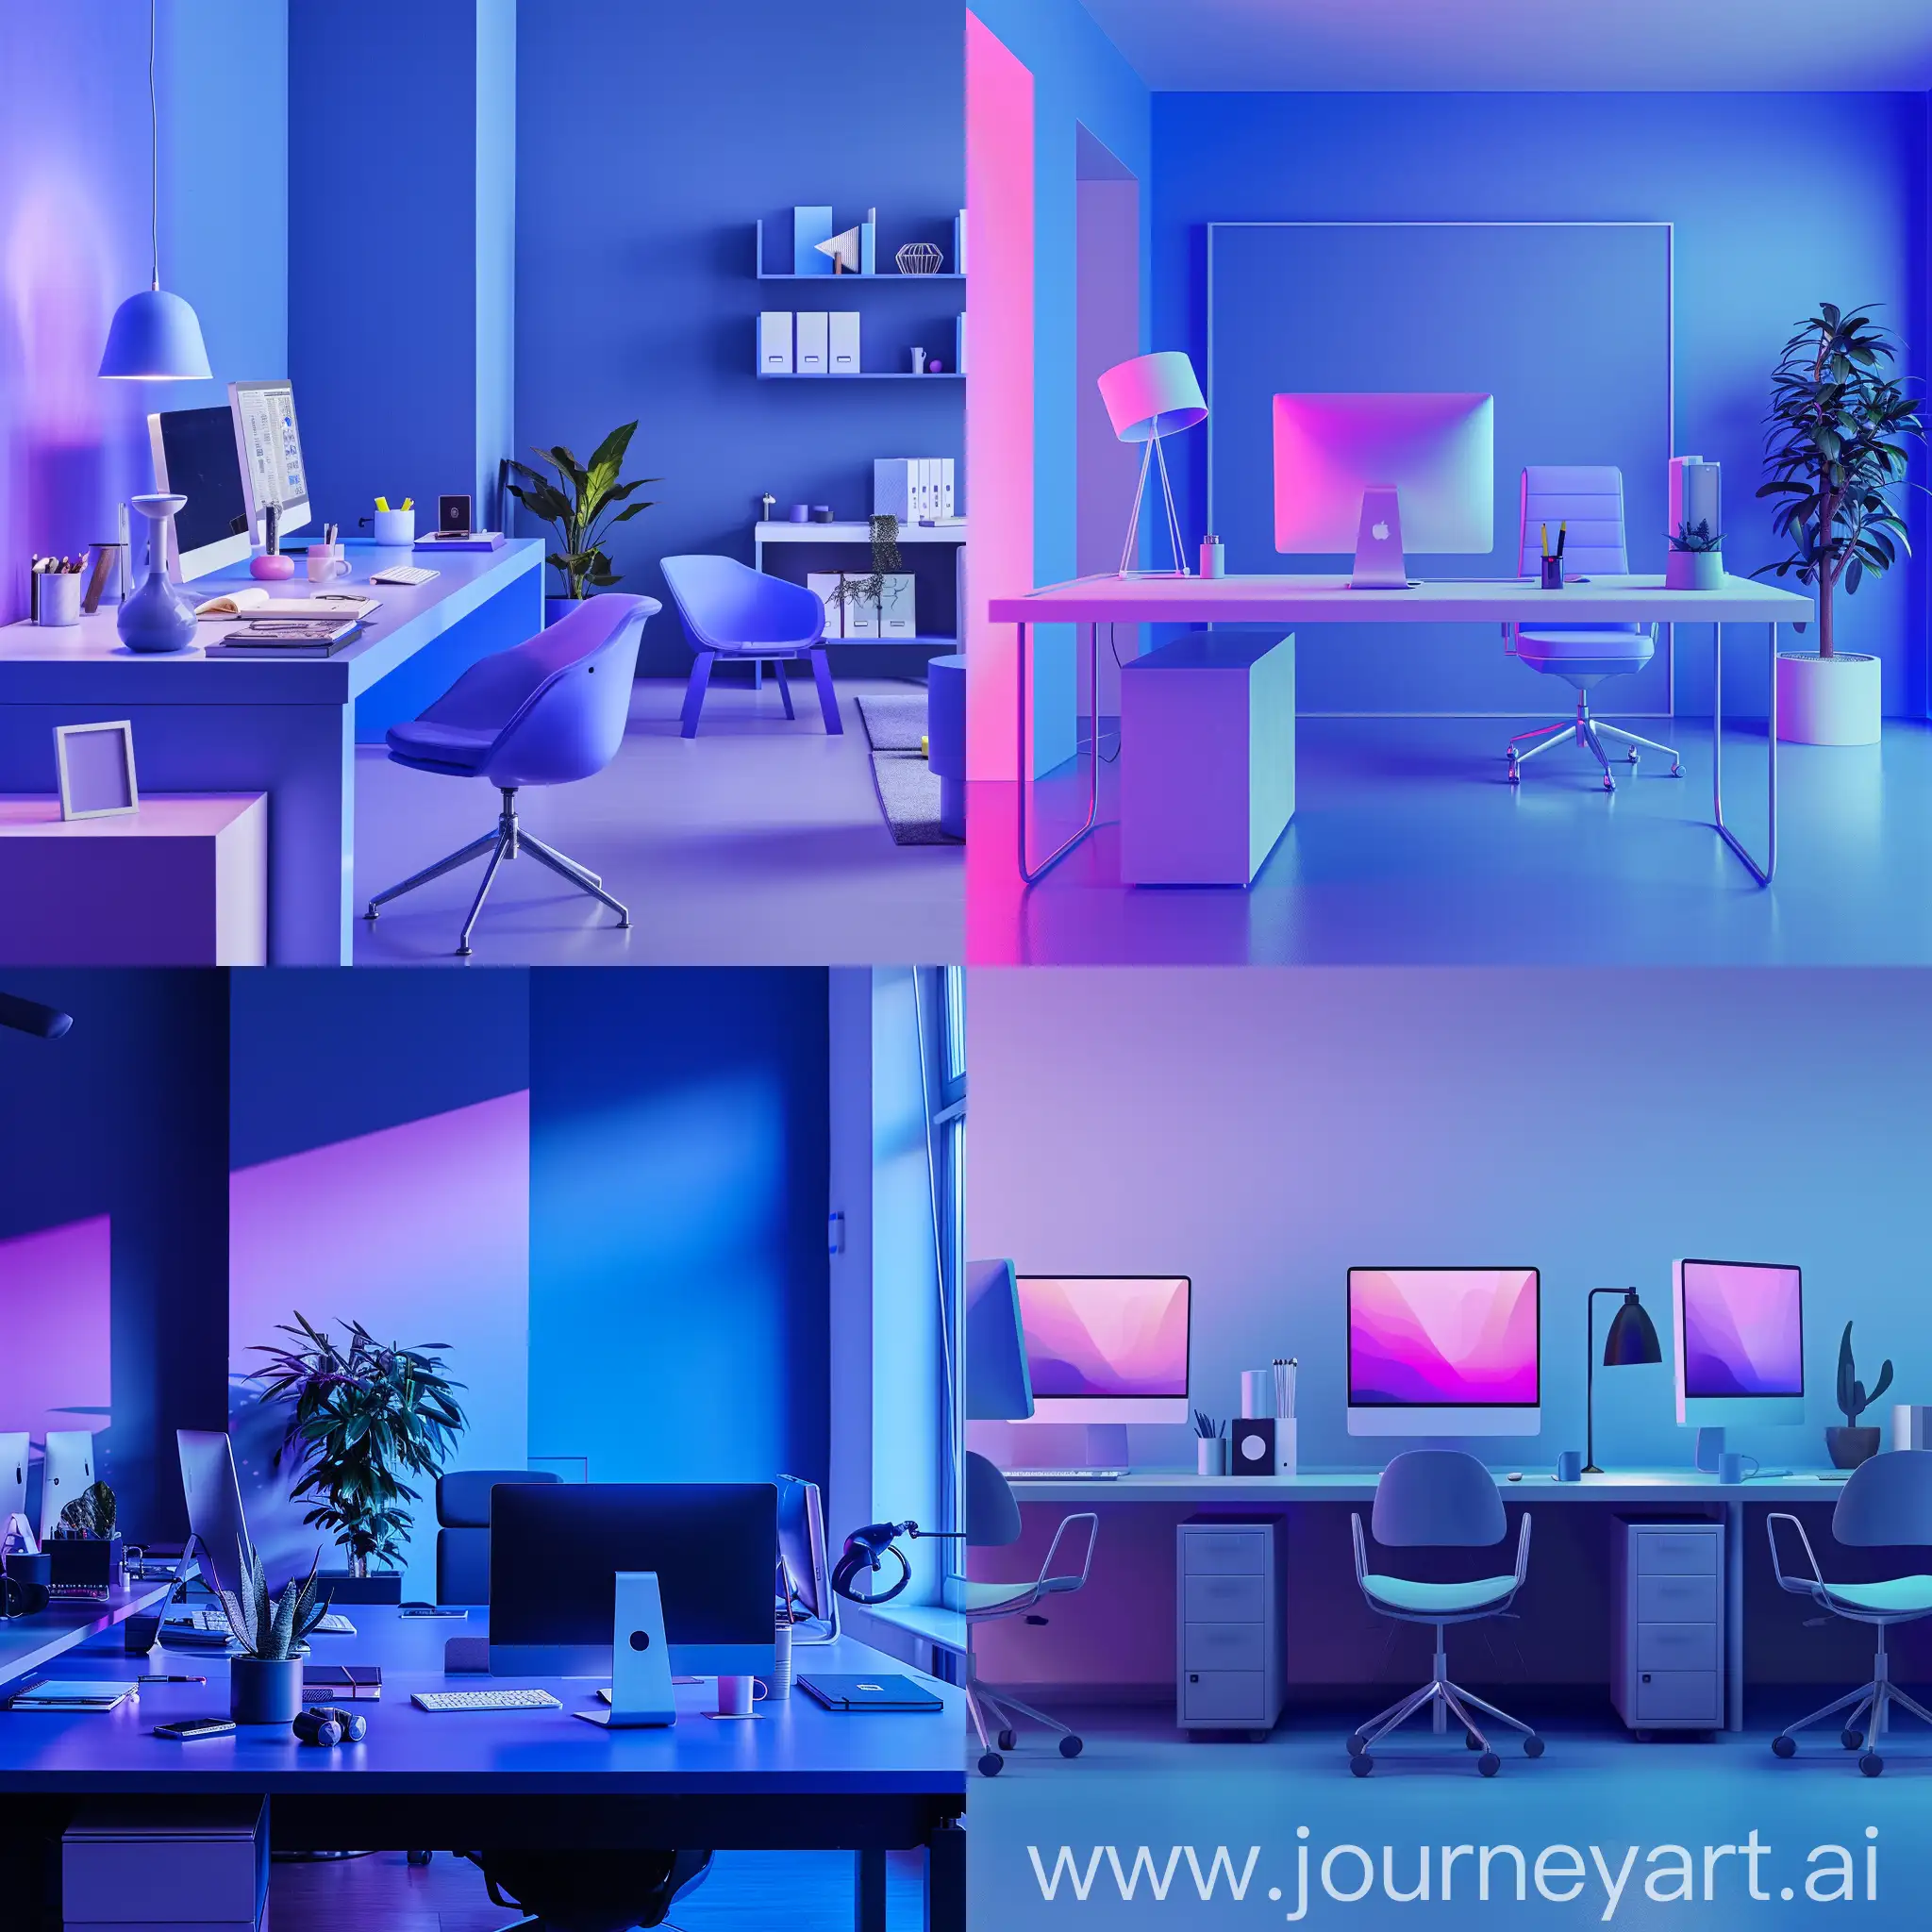 Empty graphic designer's office, blue and purple colors, the office is nice, the background is calm